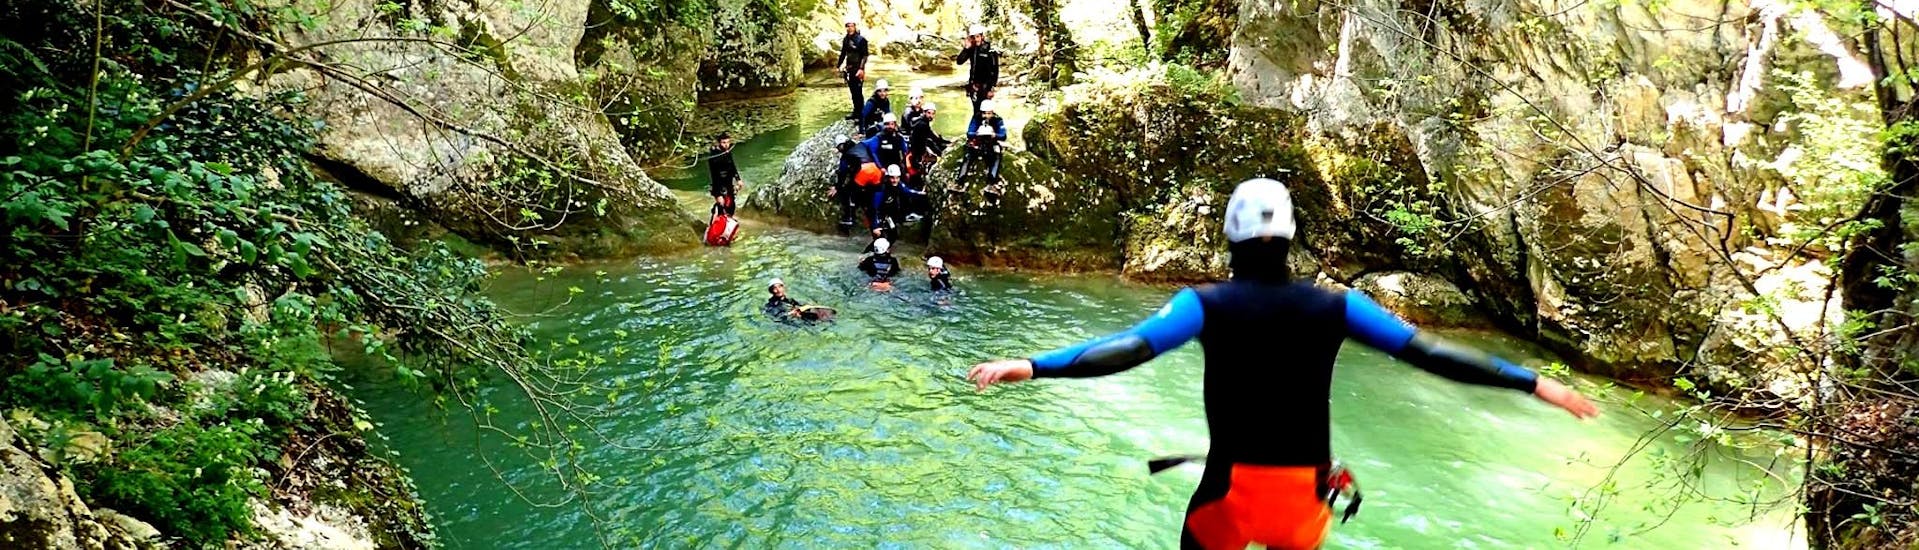 Leichte Canyoning-Tour in Subiaco - Aniene.